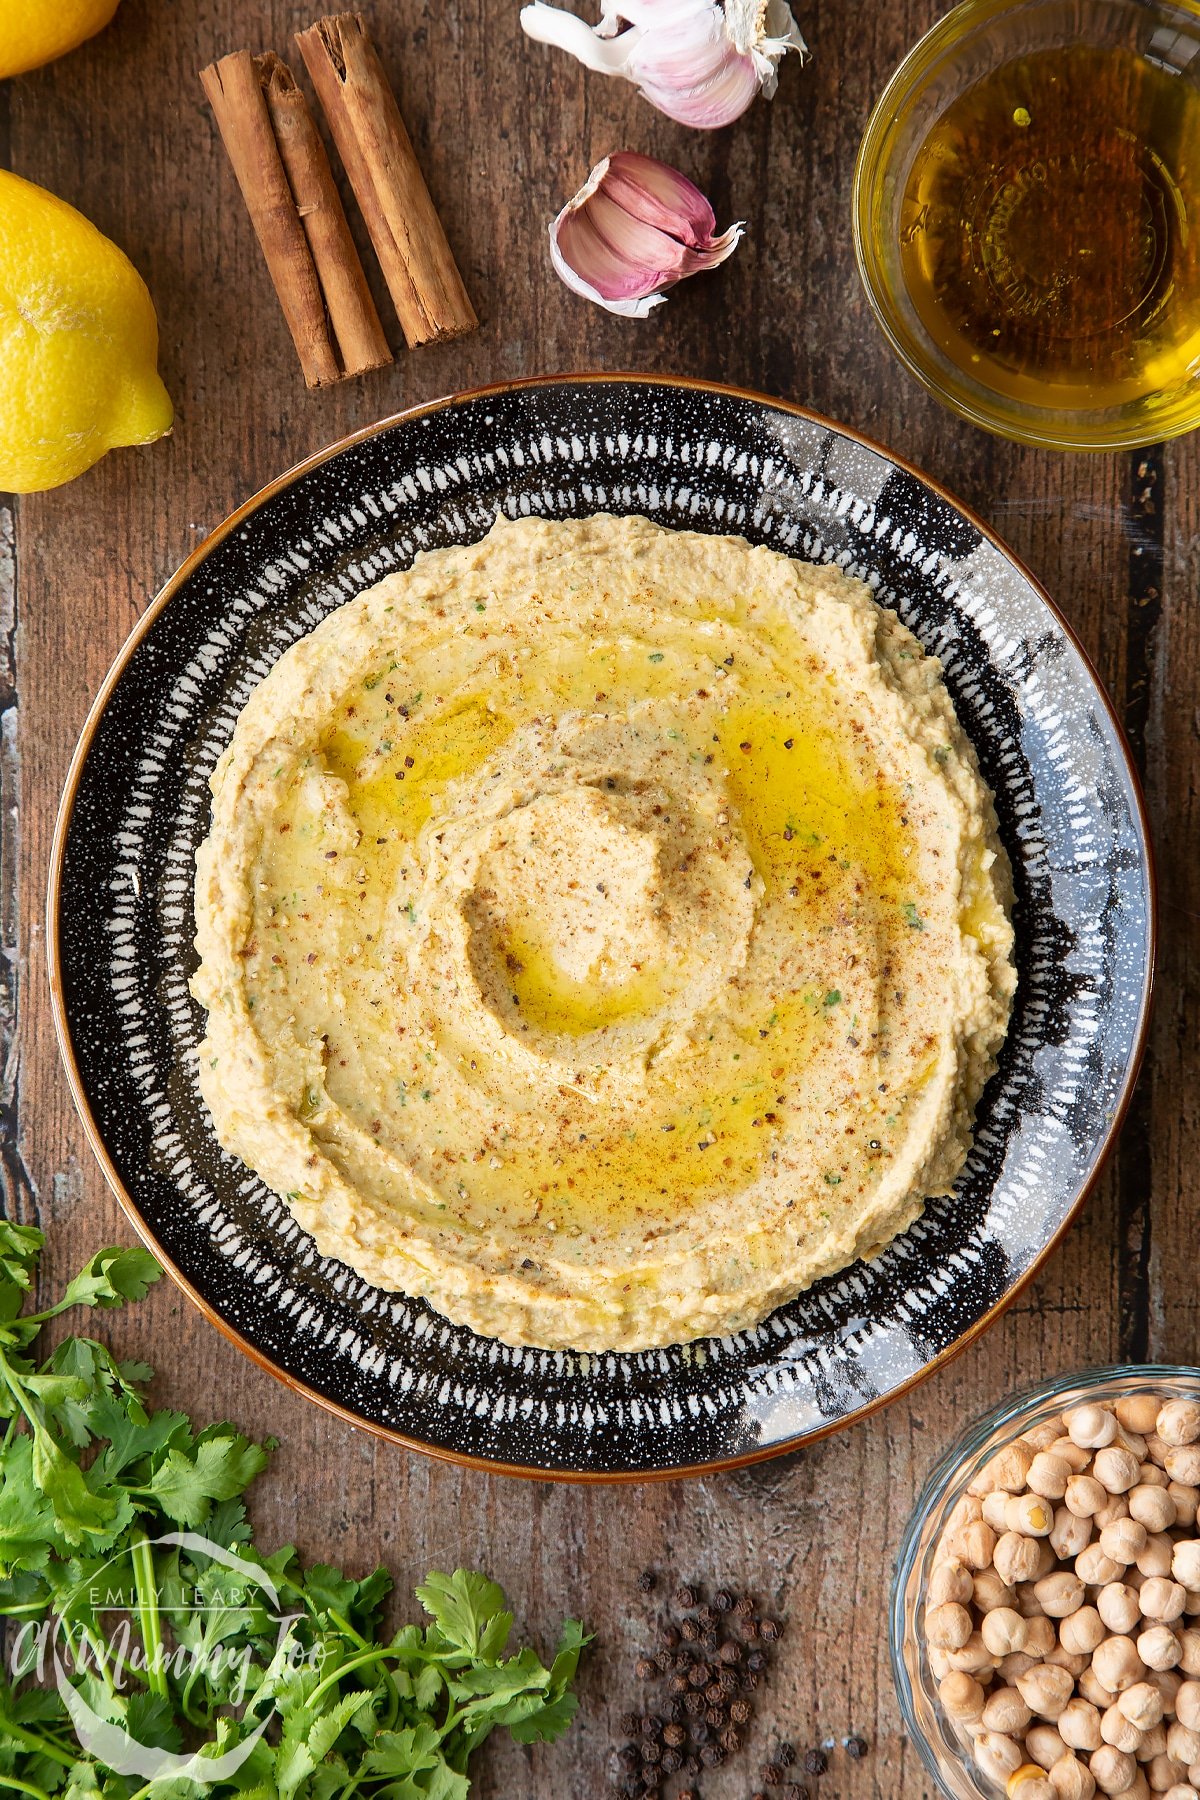 Cinnamon hummus served in a black and white bowl, shown from above. It has been seasoned with cinnamon and olive oil